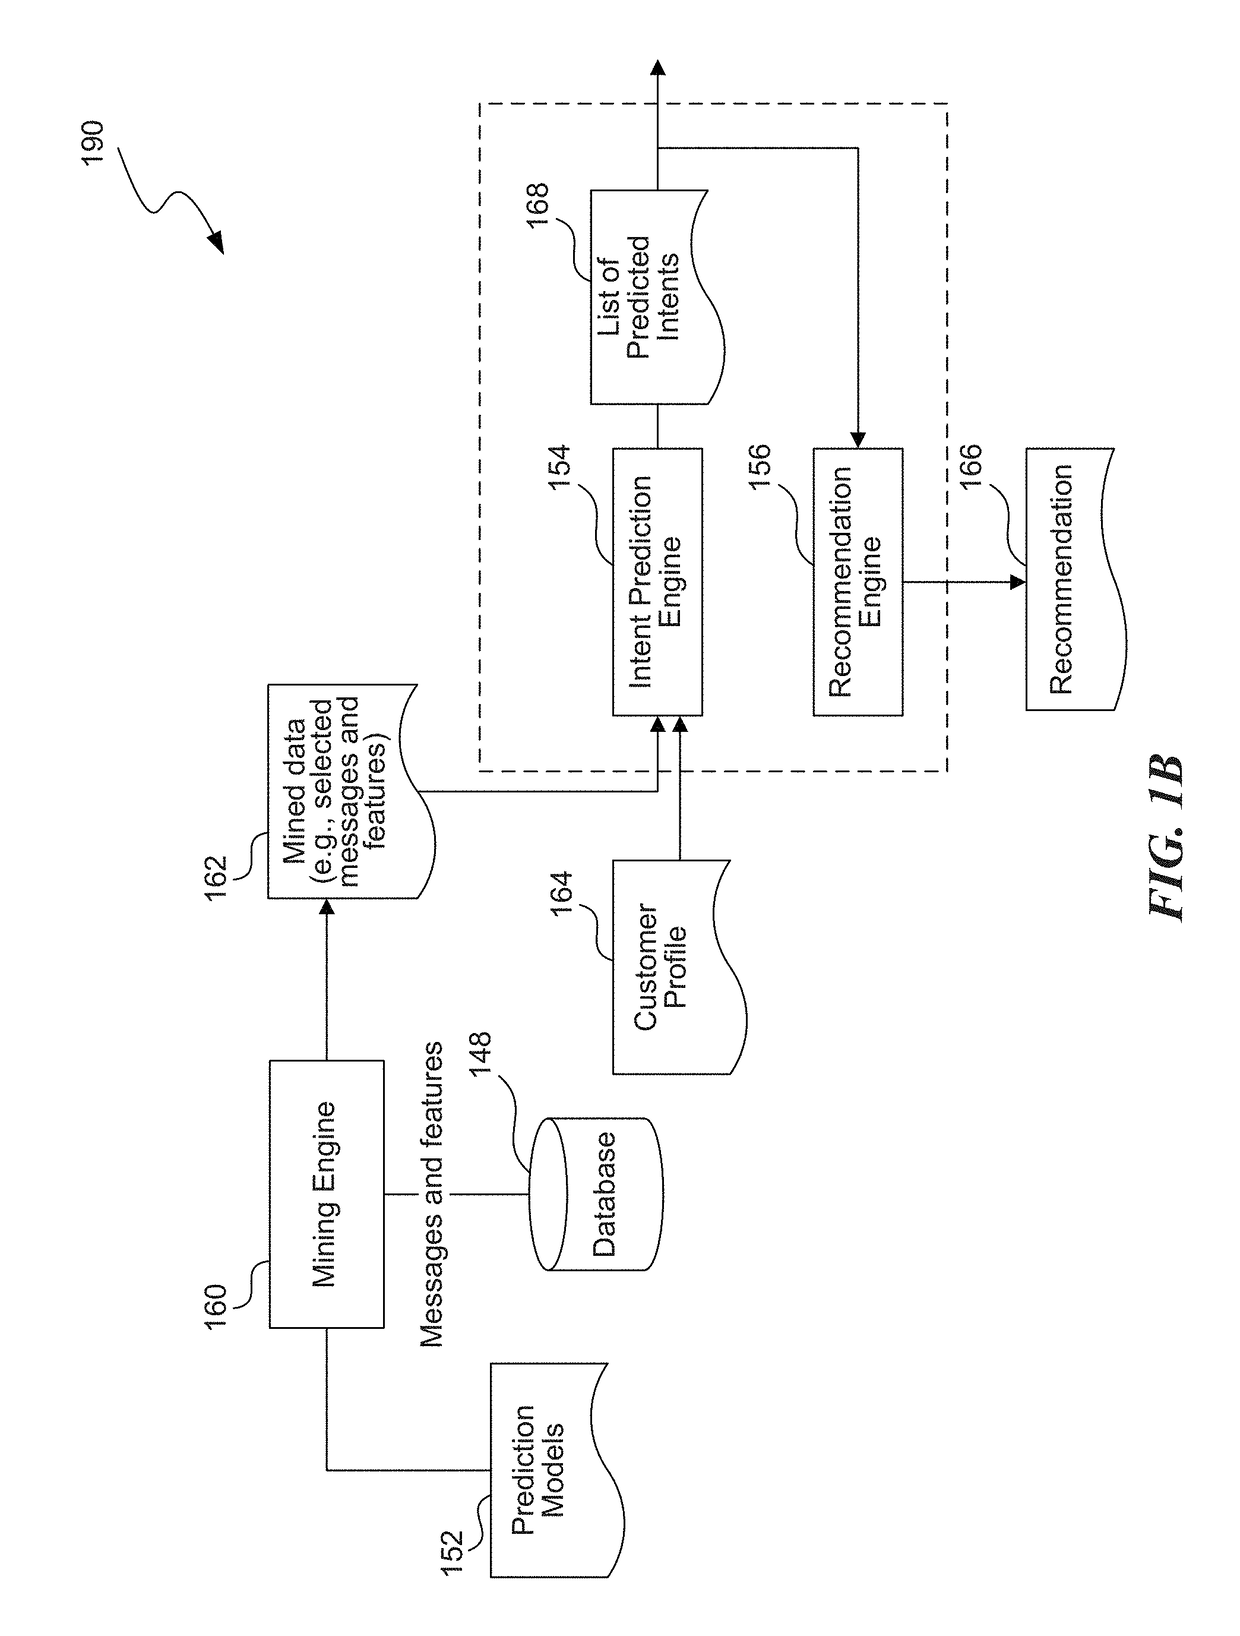 Systems and methods for facilitating dialogue mining